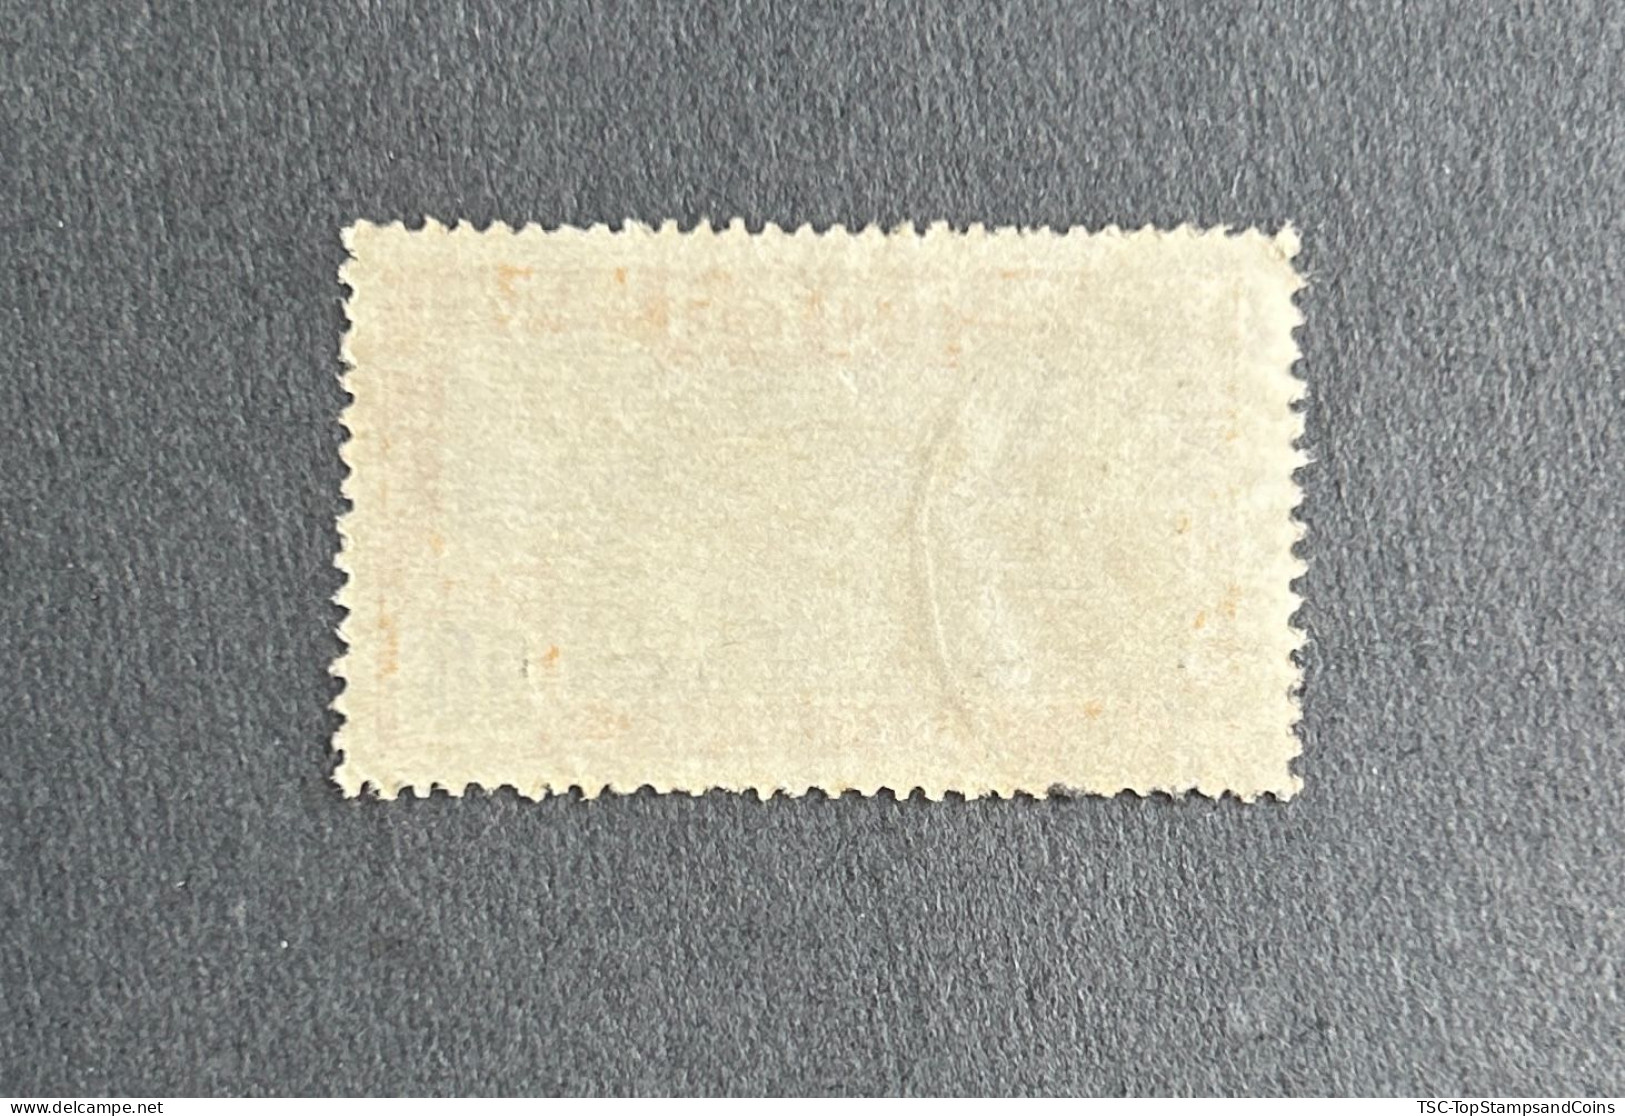 FRTG0136U7 - Agriculture - Cocoa Plantation - 50 C Used Stamp - French Togo - 1924 - Used Stamps